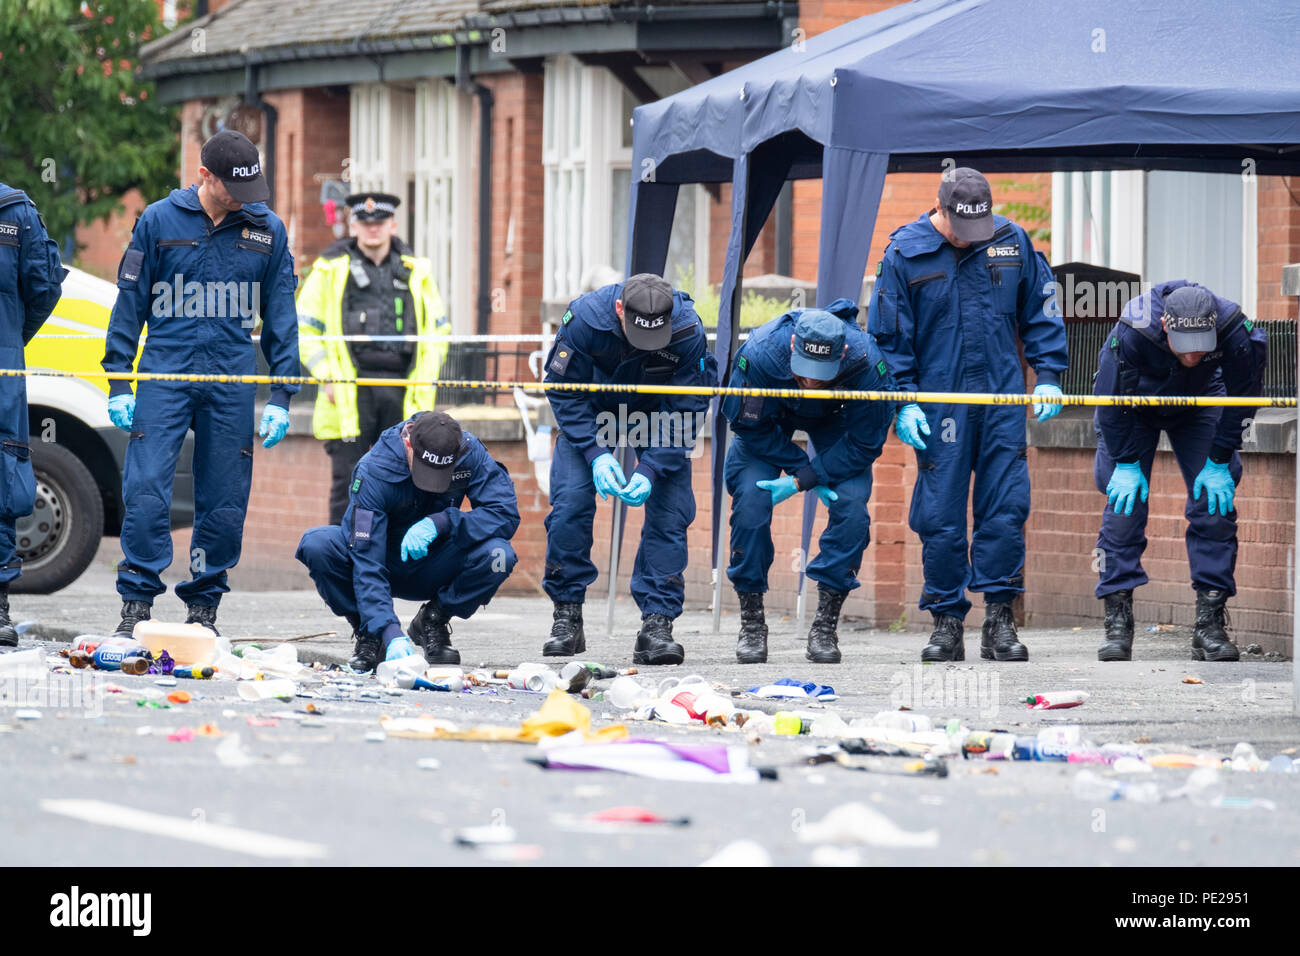 Manchester, UK. 12th August 2018. Two children are among 10 injured in a shooting at a street party in the Moss Side area of Manchester. Armed Police were called to Claremont Road at 02:30am on Sunday, August 12, 2018. Police said nine victims had 'pellet-type wounds that are not believed to be serious'. A 10th person is in a serious condition with leg wounds. © Christopher Middleton/Alamy Live News Stock Photo